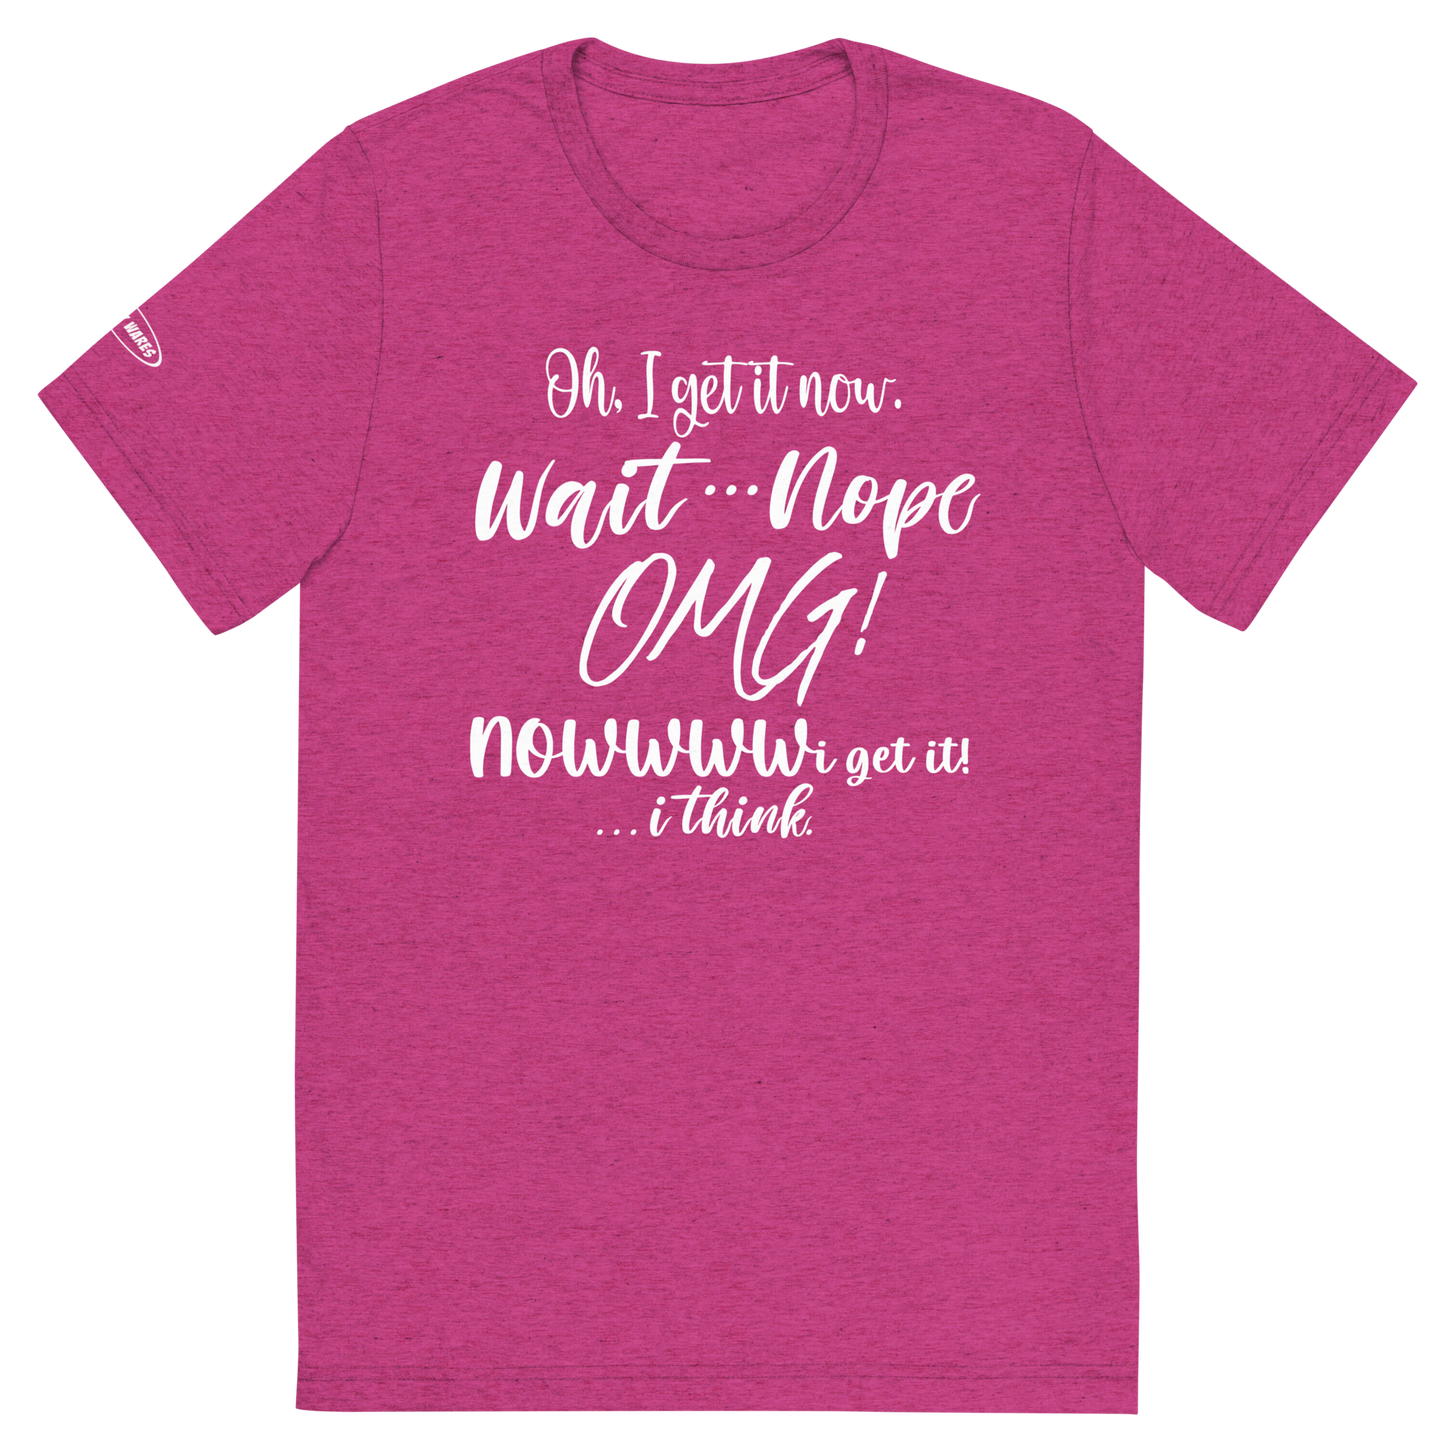 CLASSY - Oh, I get it now. Wait ... Nope. OMG! Nowww i get it! ... i think - Funny T-Shirt